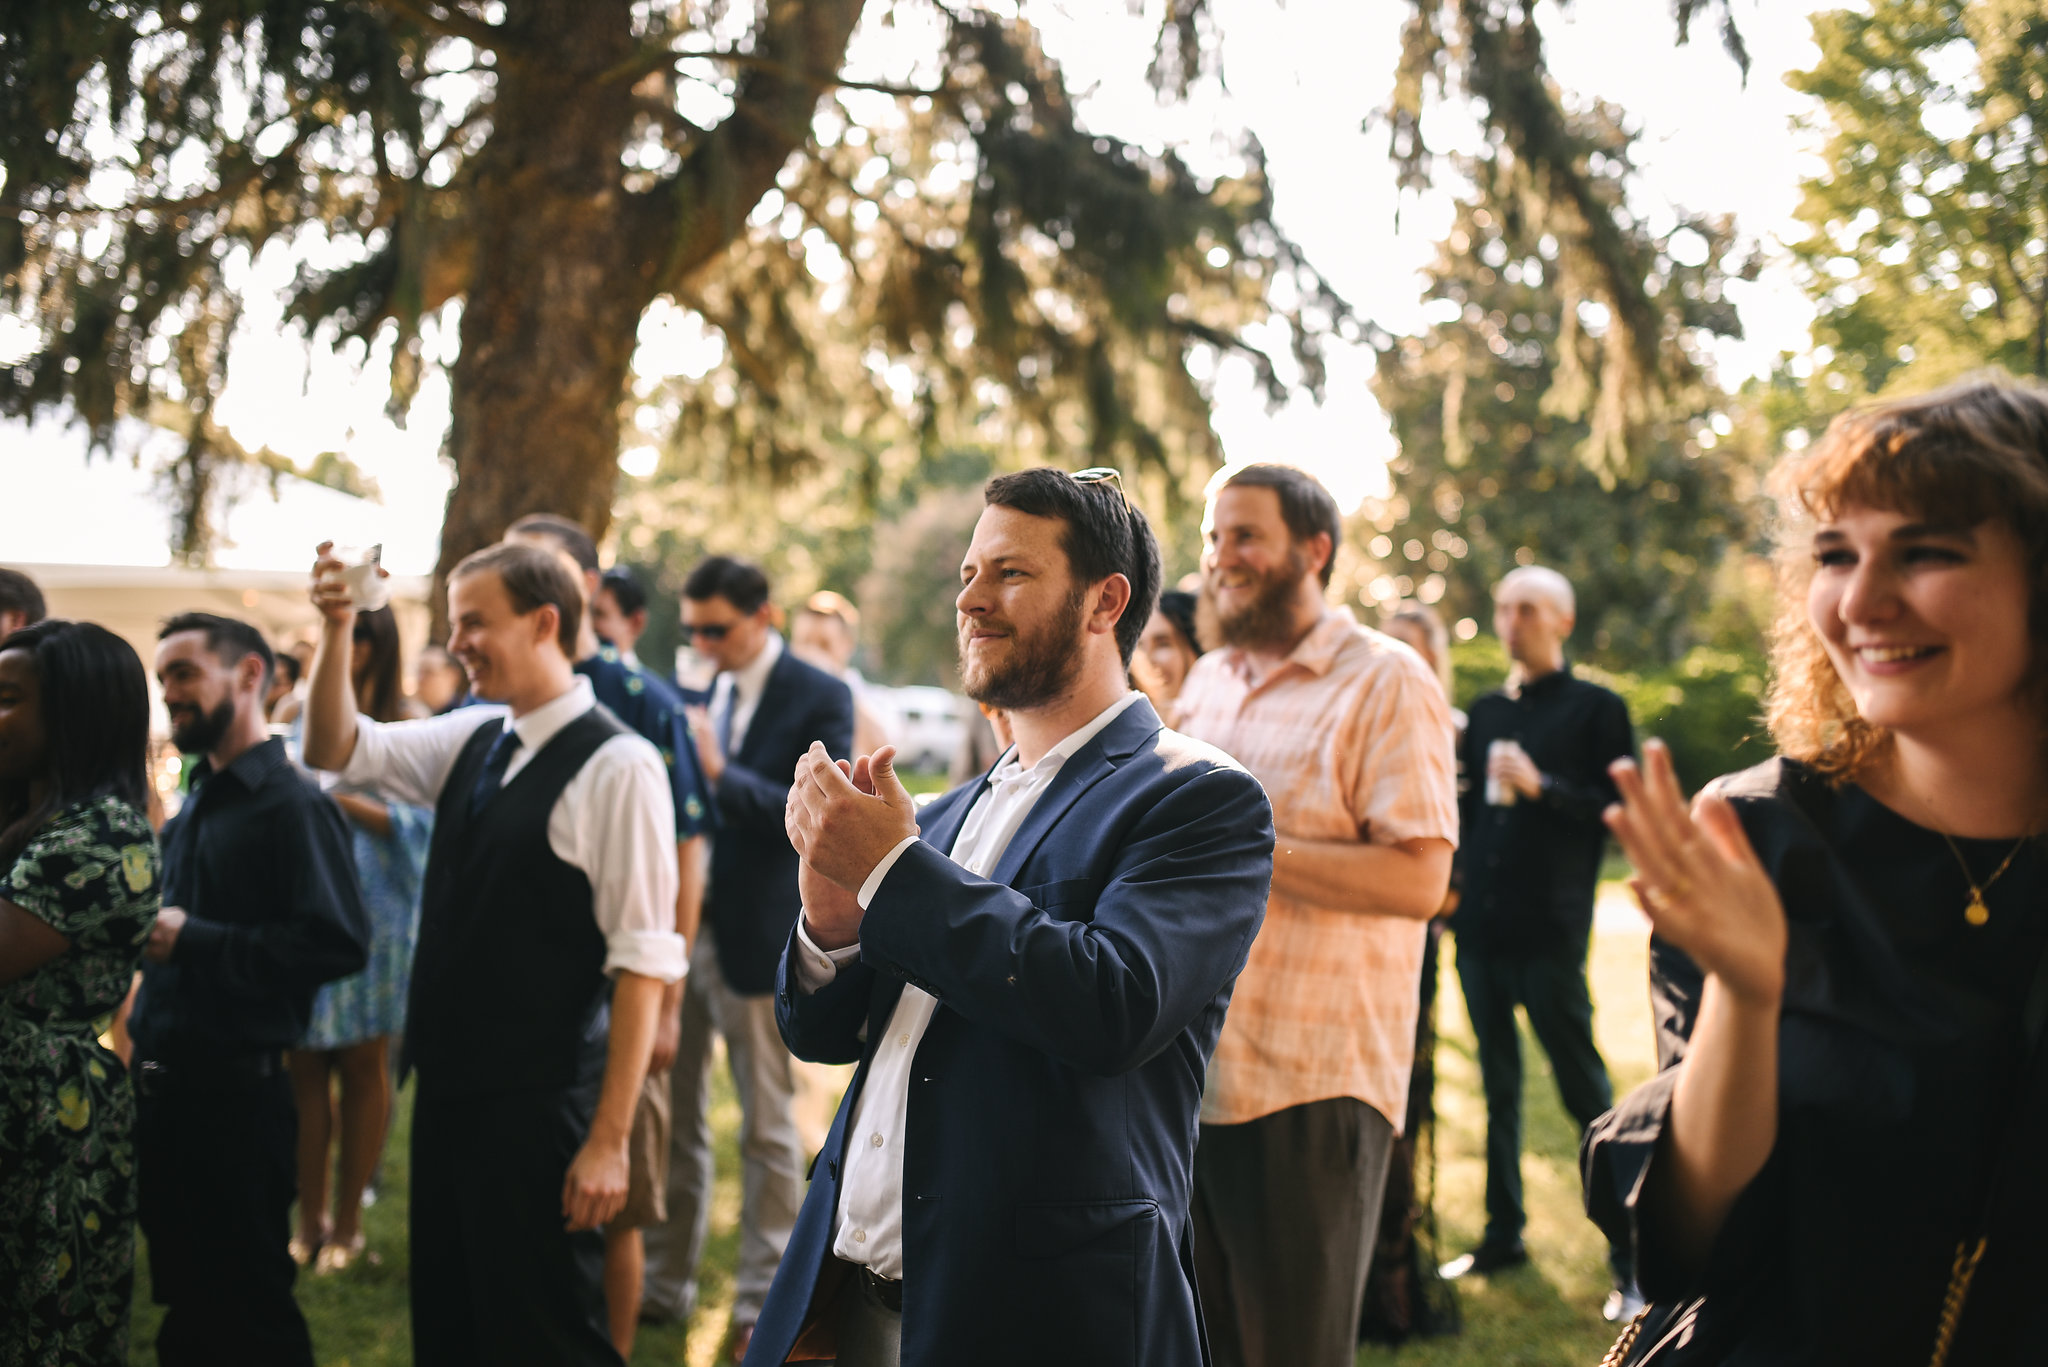  Maryland, Eastern Shore, Baltimore Wedding Photographer, Romantic, Boho, Backyard Wedding, Nature, Wedding Guests Cheering for the Bride and Groom at Ceremony 